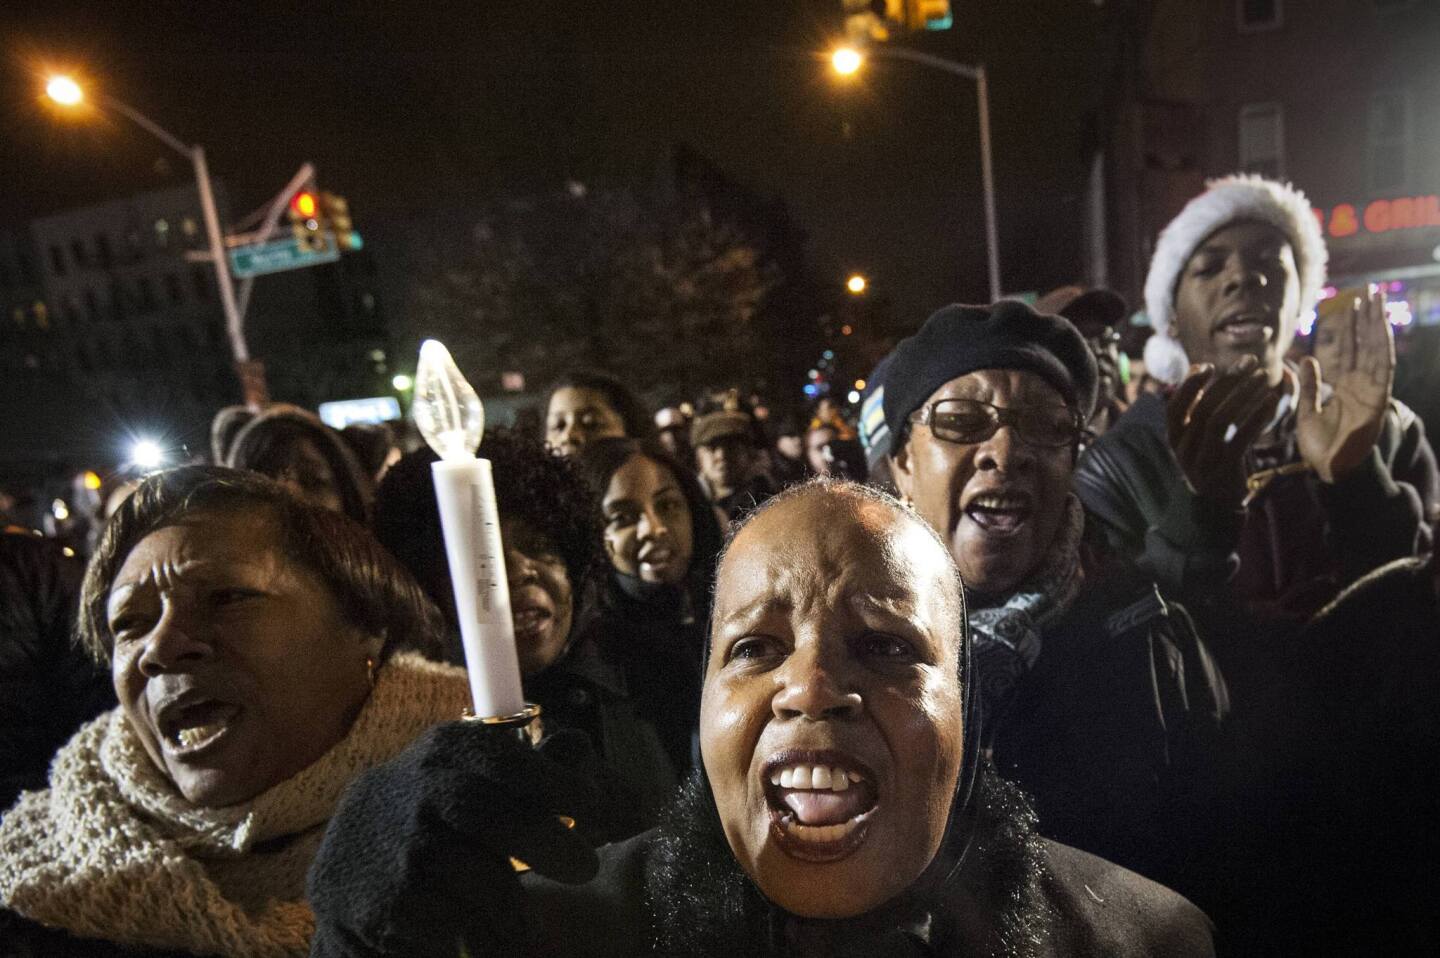 Mourners sing "This Little Light of Mine," during prayer vigil at site where two NYPD officers were fatally shot in Brooklyn borough of New York